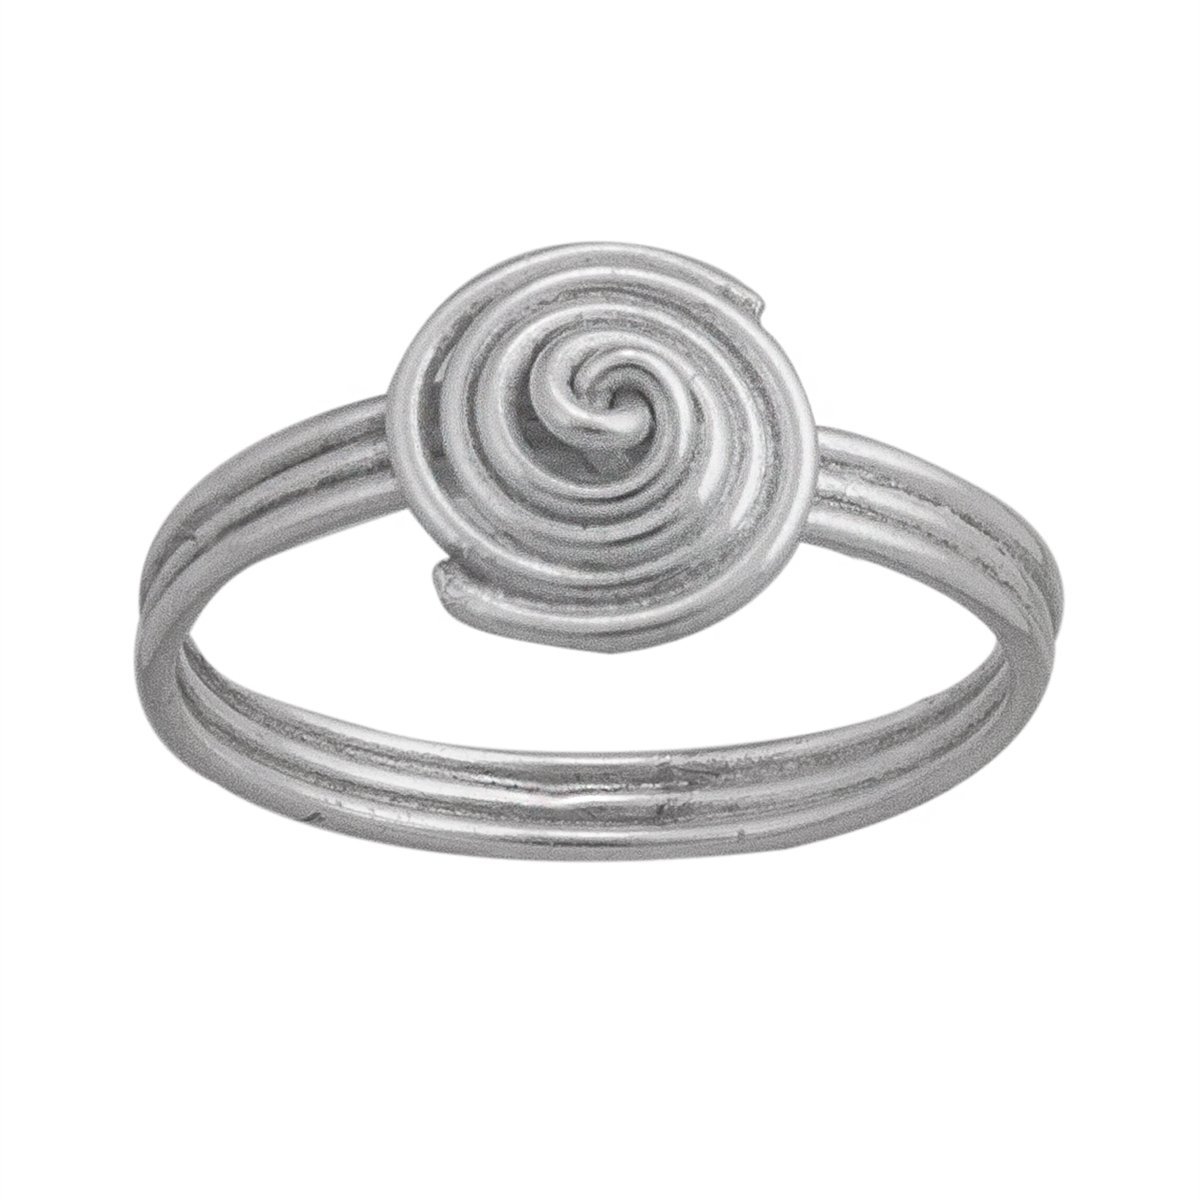 Buy Kicky and Perky 925 Sterling Silver Elegant Unique Fabish Spiral Ring  for Women Online at Kicky and Perky | GRP382-13